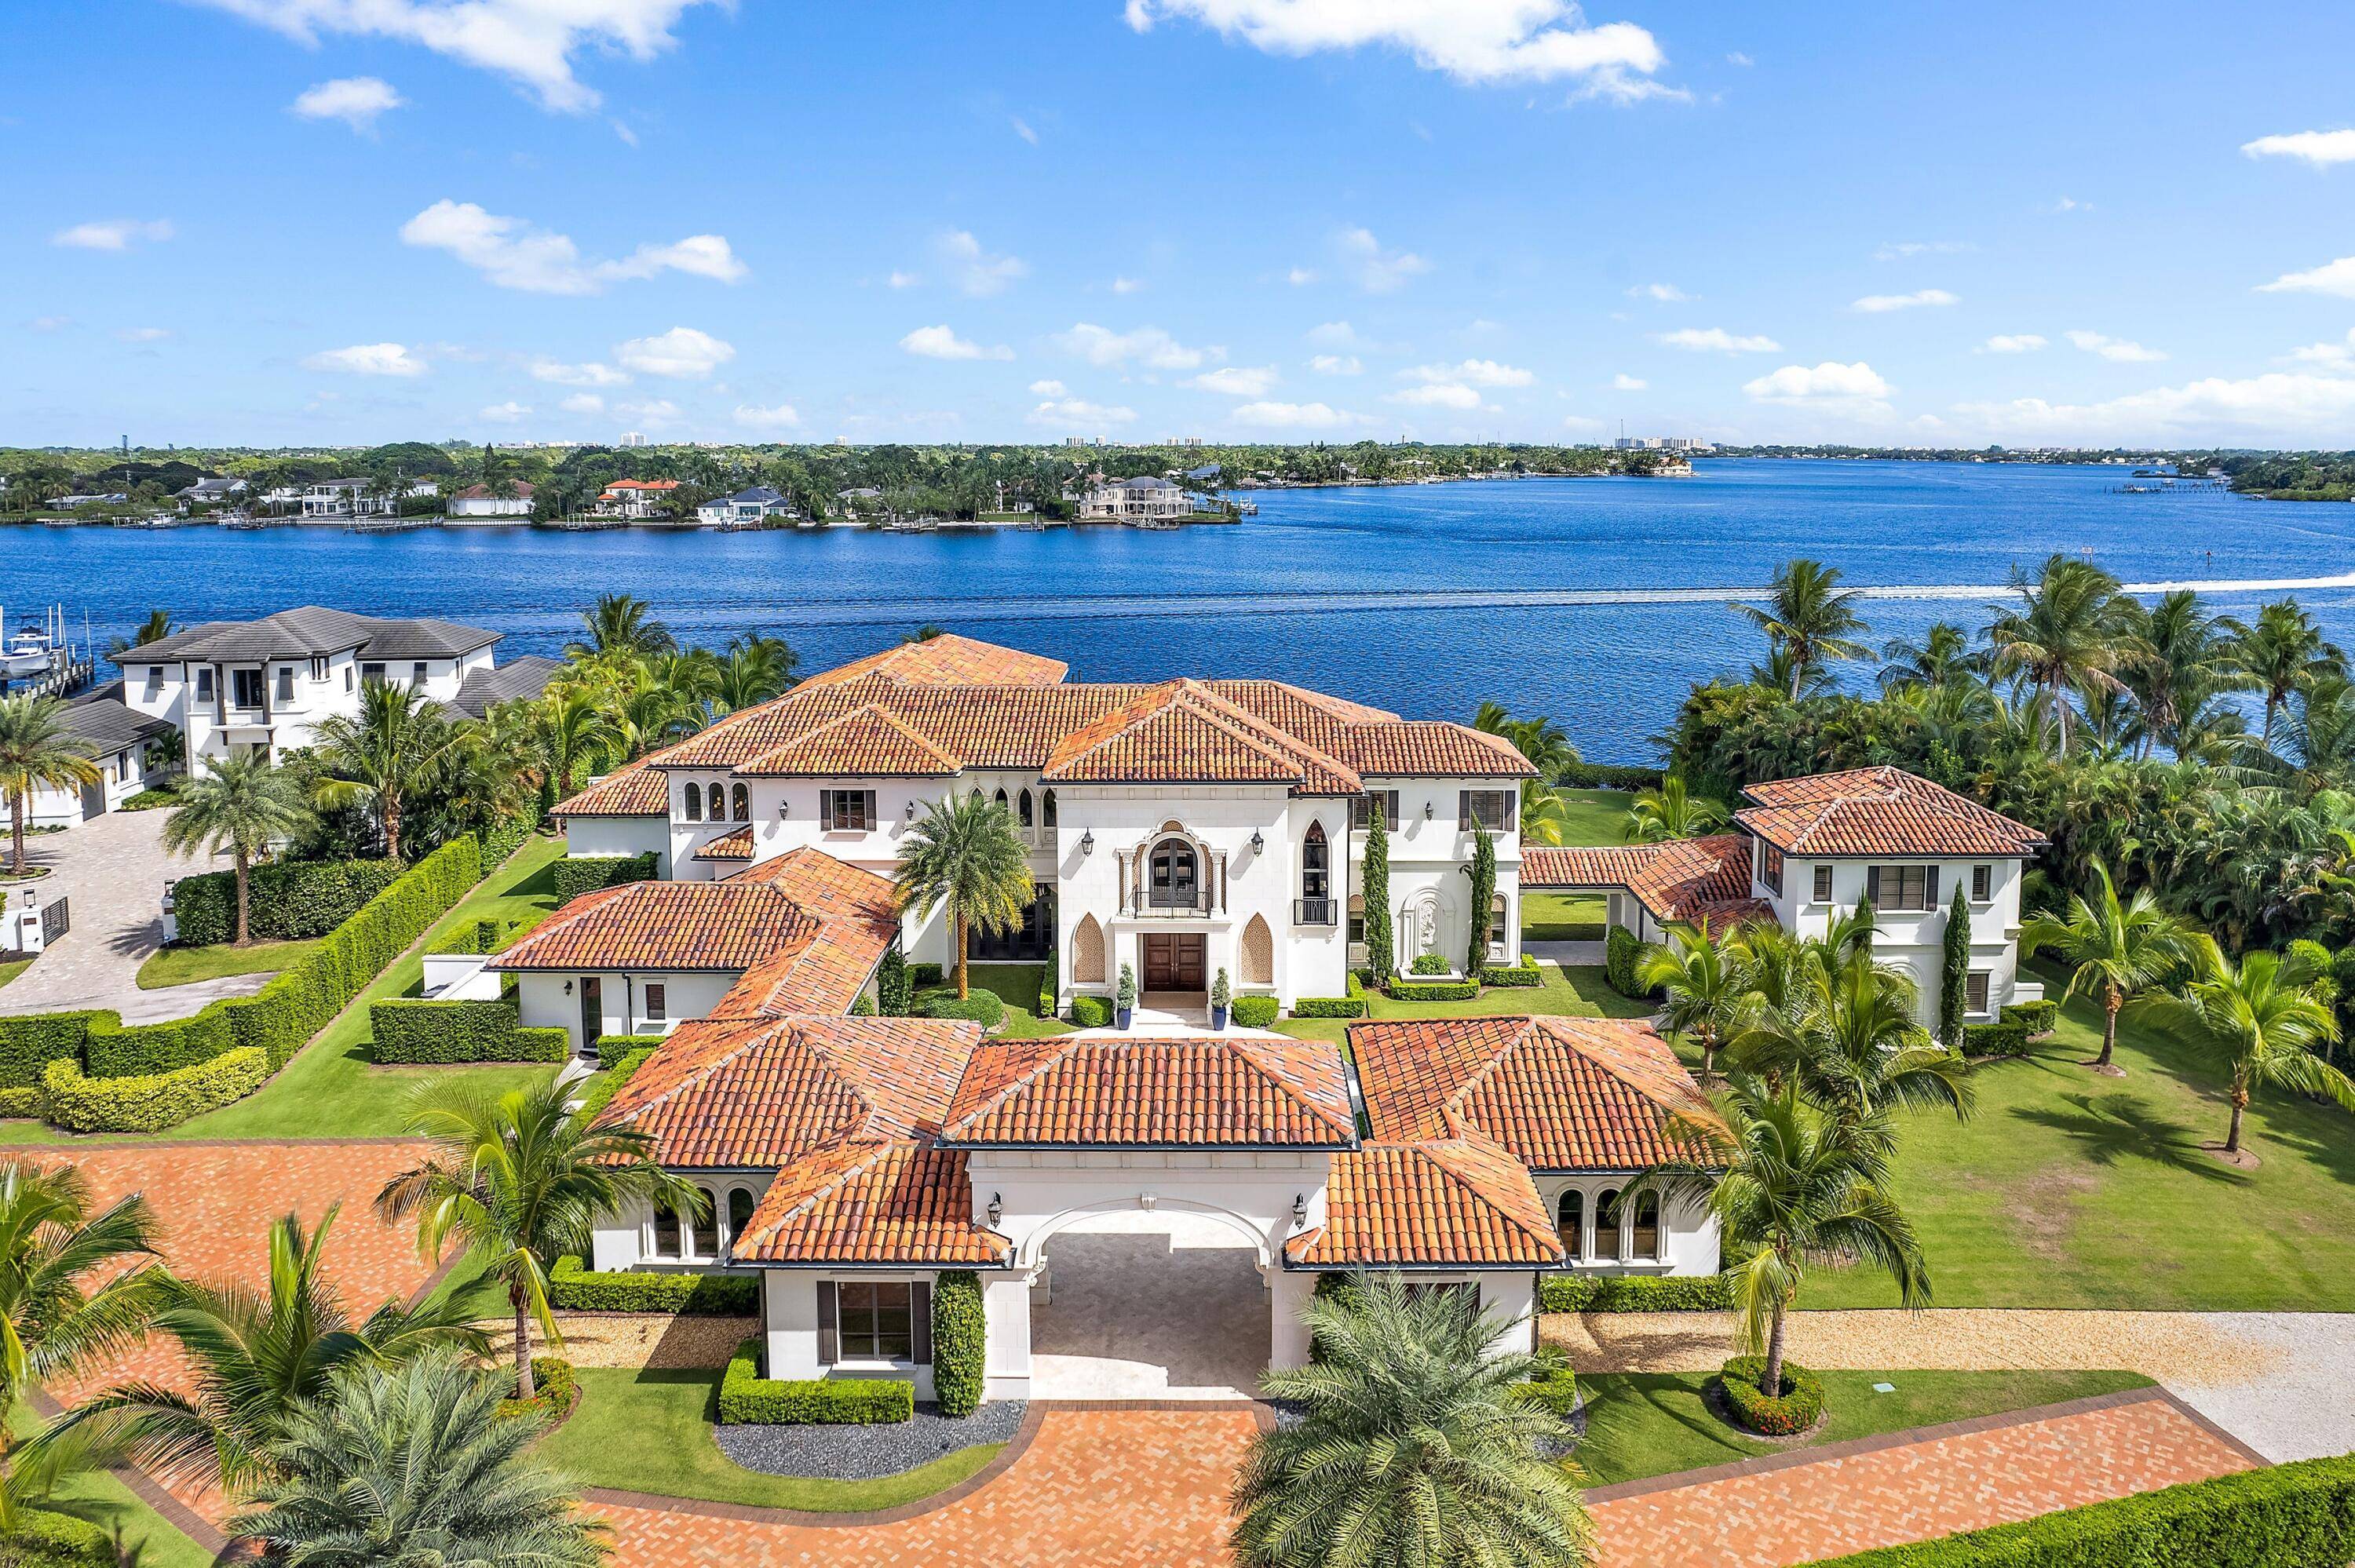 Welcome to Villa Real, a Breathtaking estate of incomparable elegance sited on the largest assemblage of Waterfront land currently available in Jupiter Just under 4 acres with 254' of stunning ...